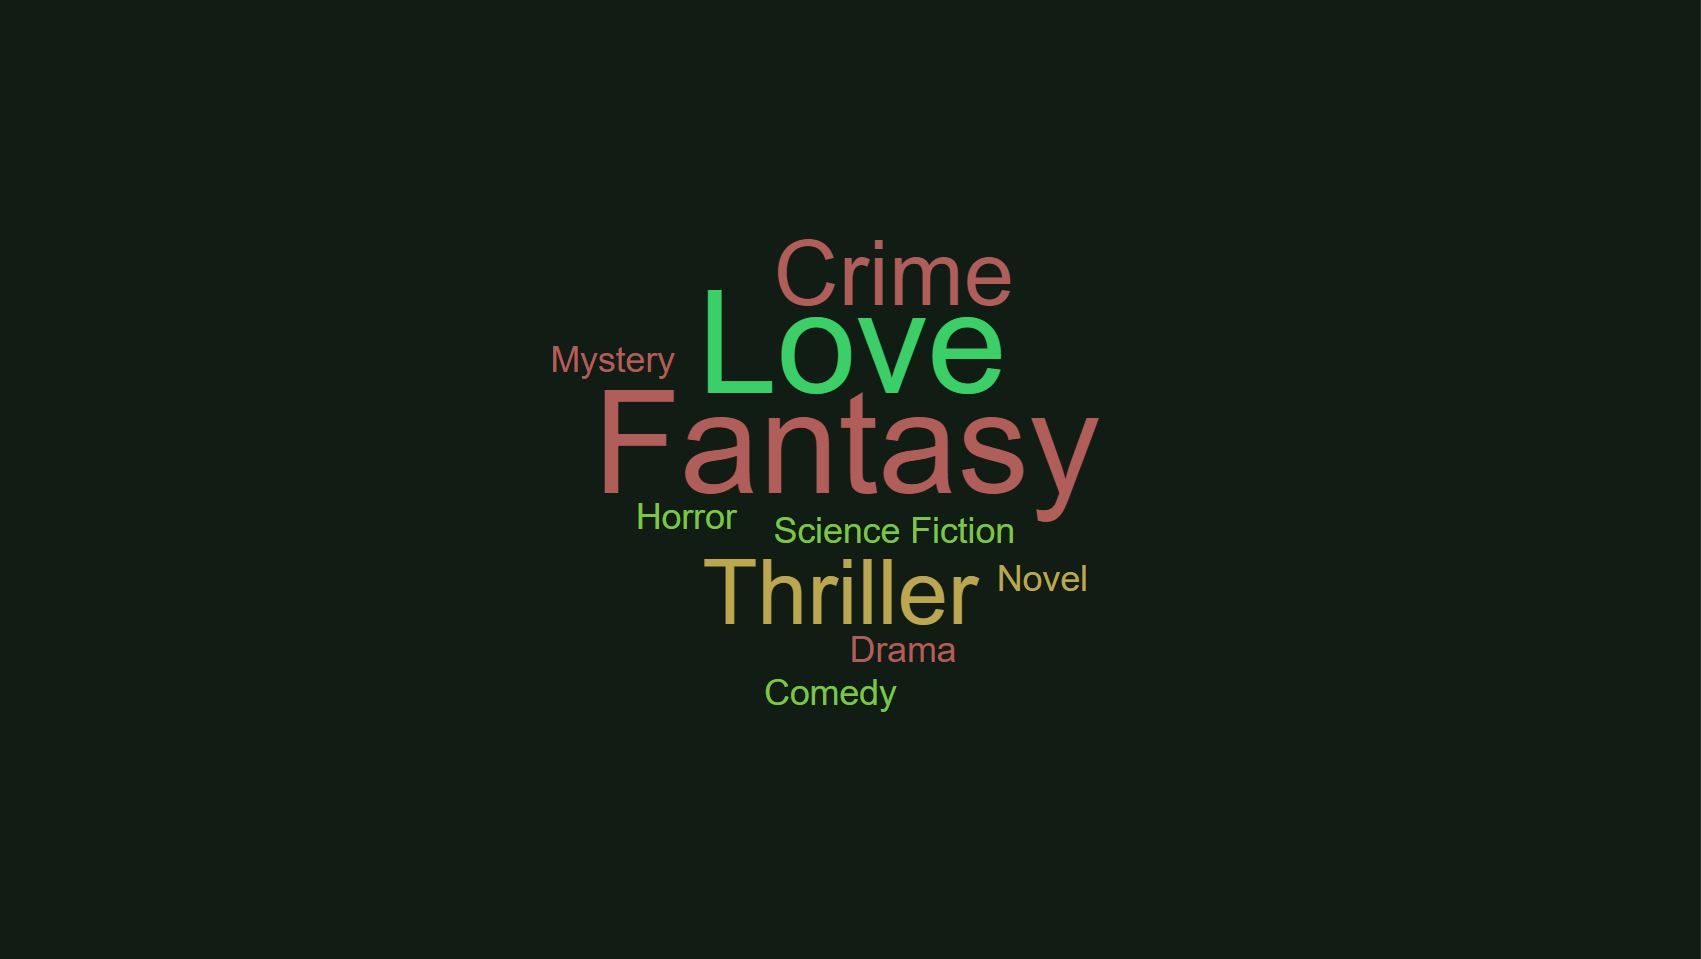 A word cloud on the list of fiction genres